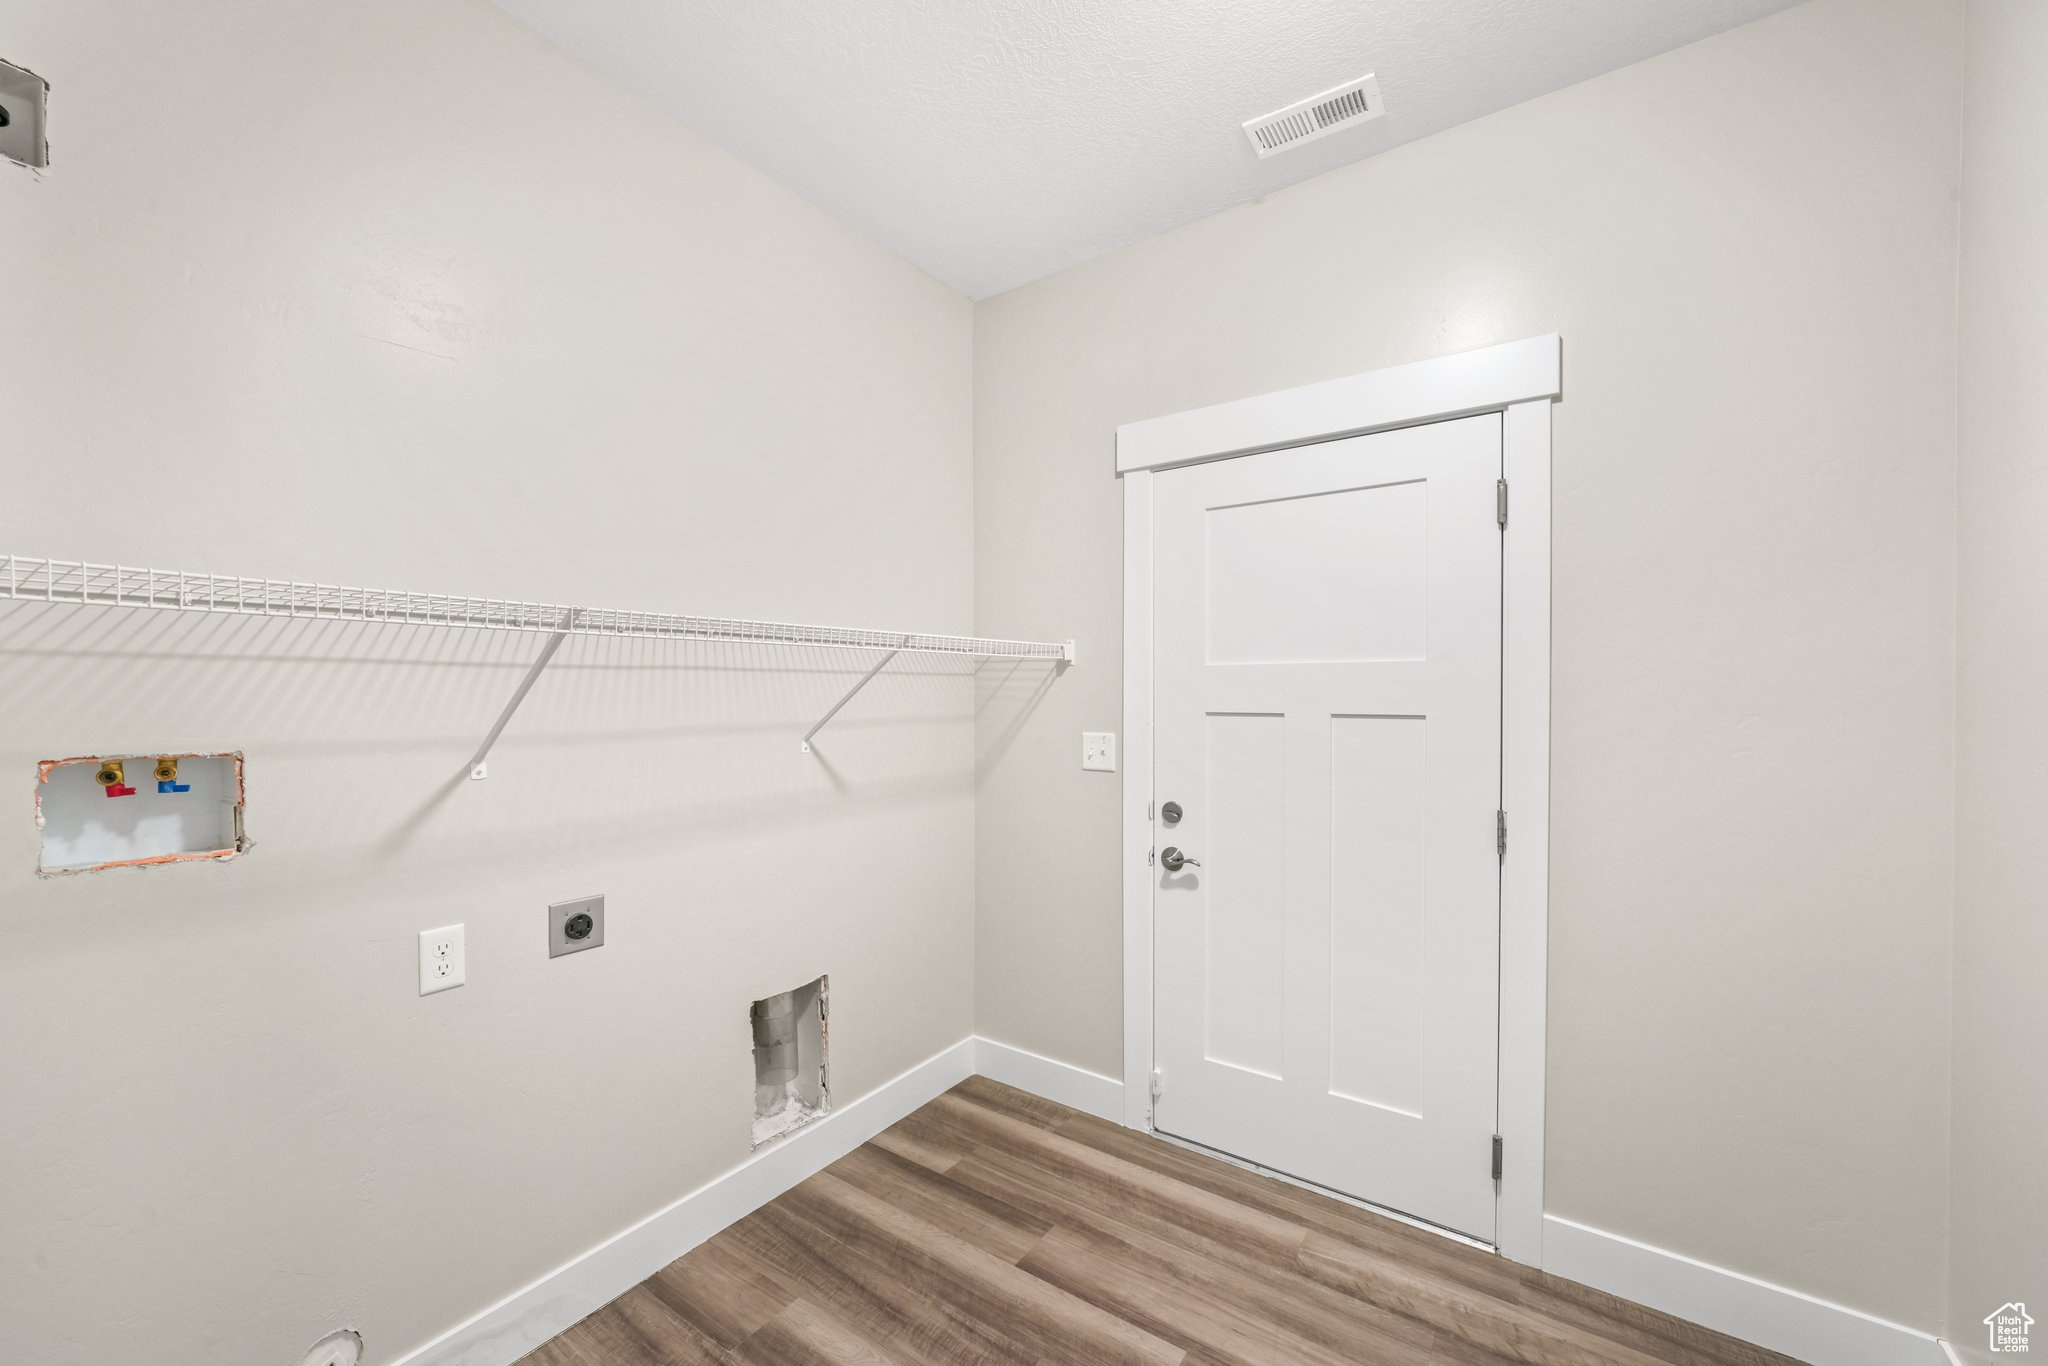 Laundry room, access to garage